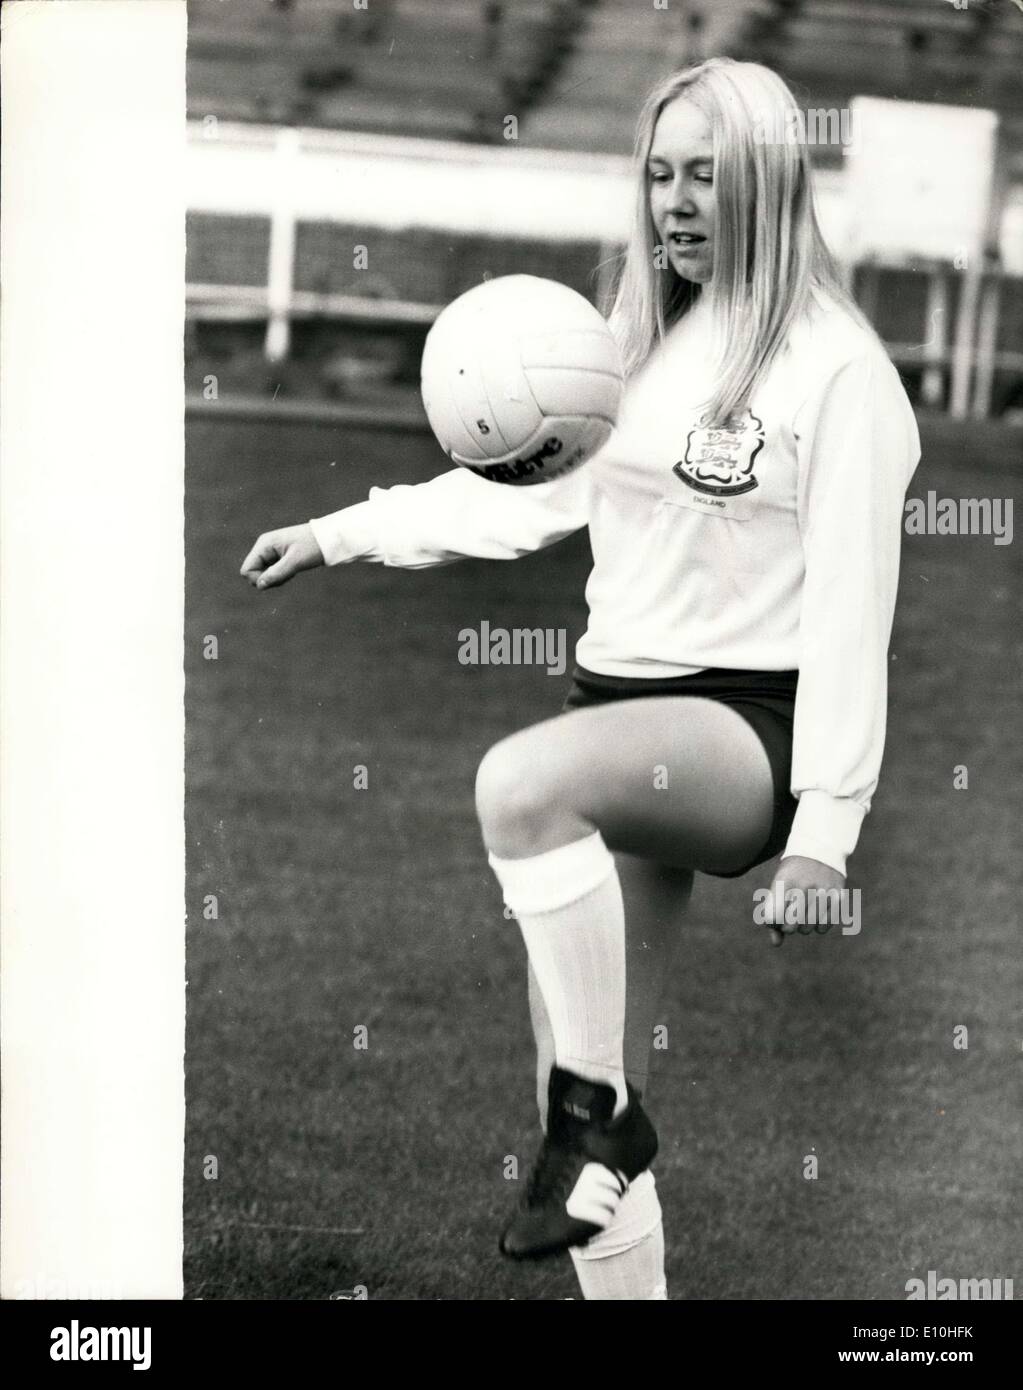 Nov. 15, 1972 - ,England's Women Soccer team train for International against Scotland.: The first ever Official Women's Soccer International in this country, will take place at Revenscraig Park, Greenock, Scotland, and today members of the England squad and a warm-up at Wembley. Photo shows Jeannie Allott, 16, of Fodens L.F.C., indulges in a spot of ball control - at Wembley today. Stock Photo